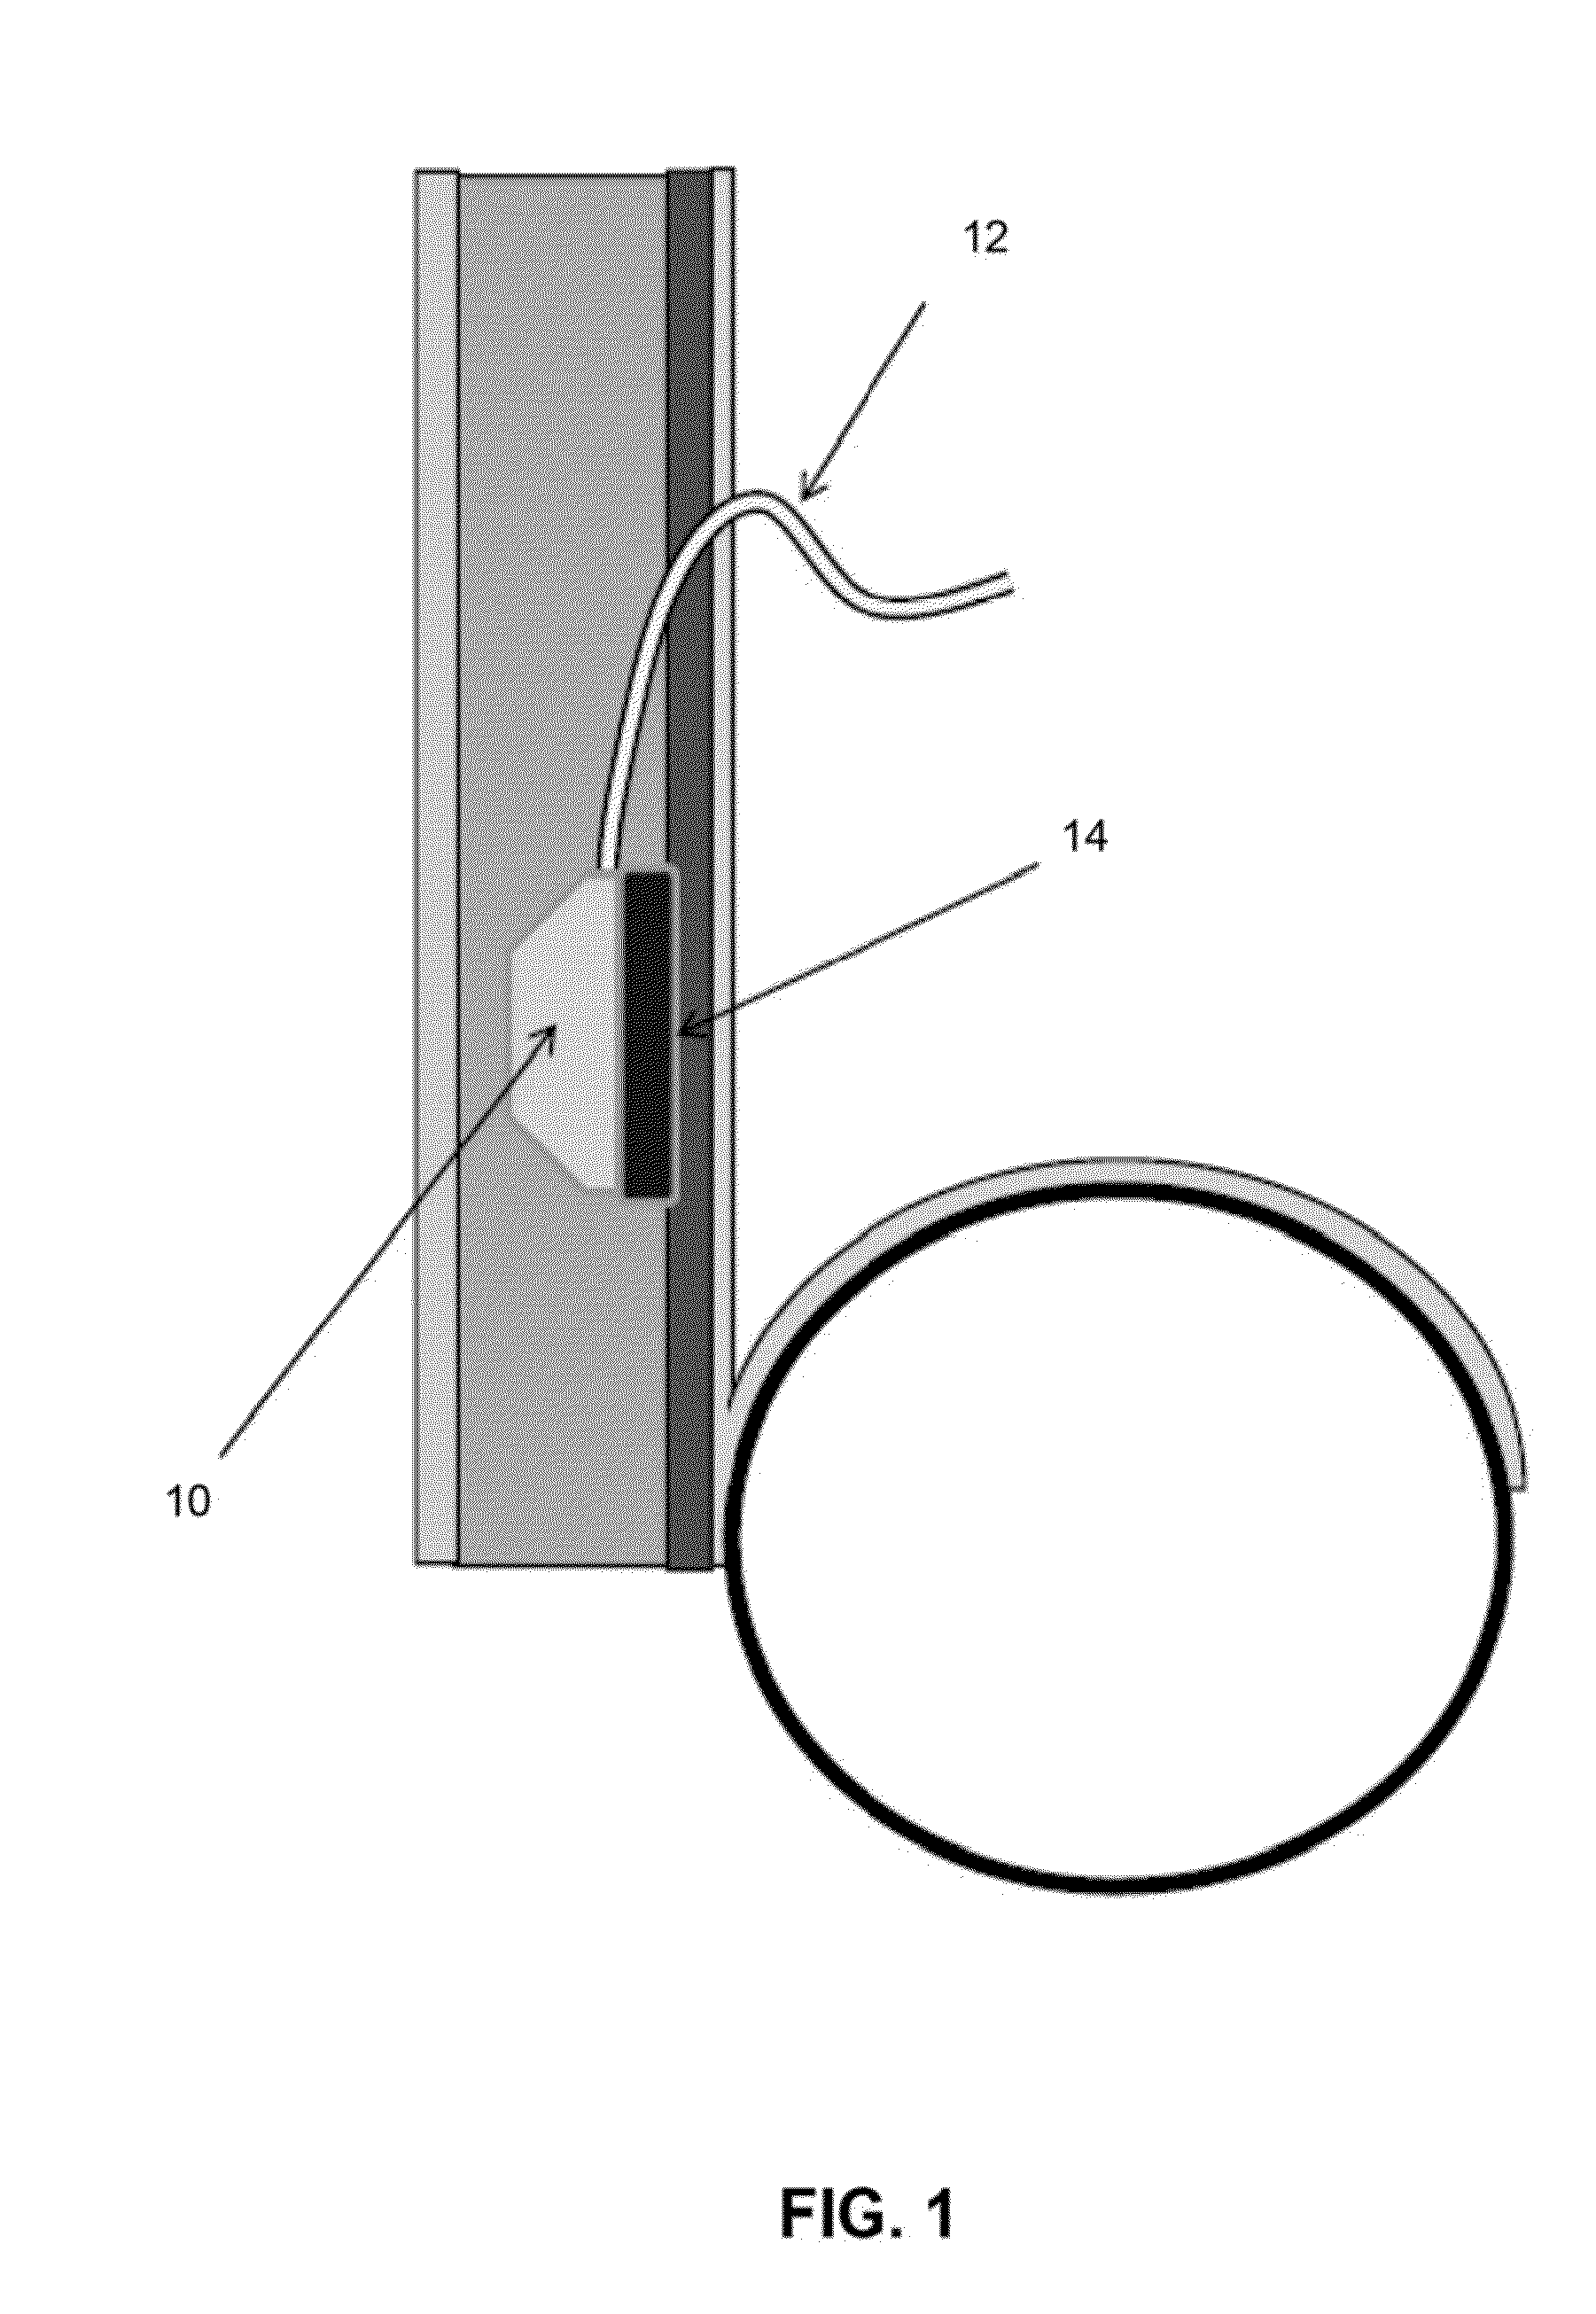 Method and apparatus for automated active sterilization of fully implanted devices